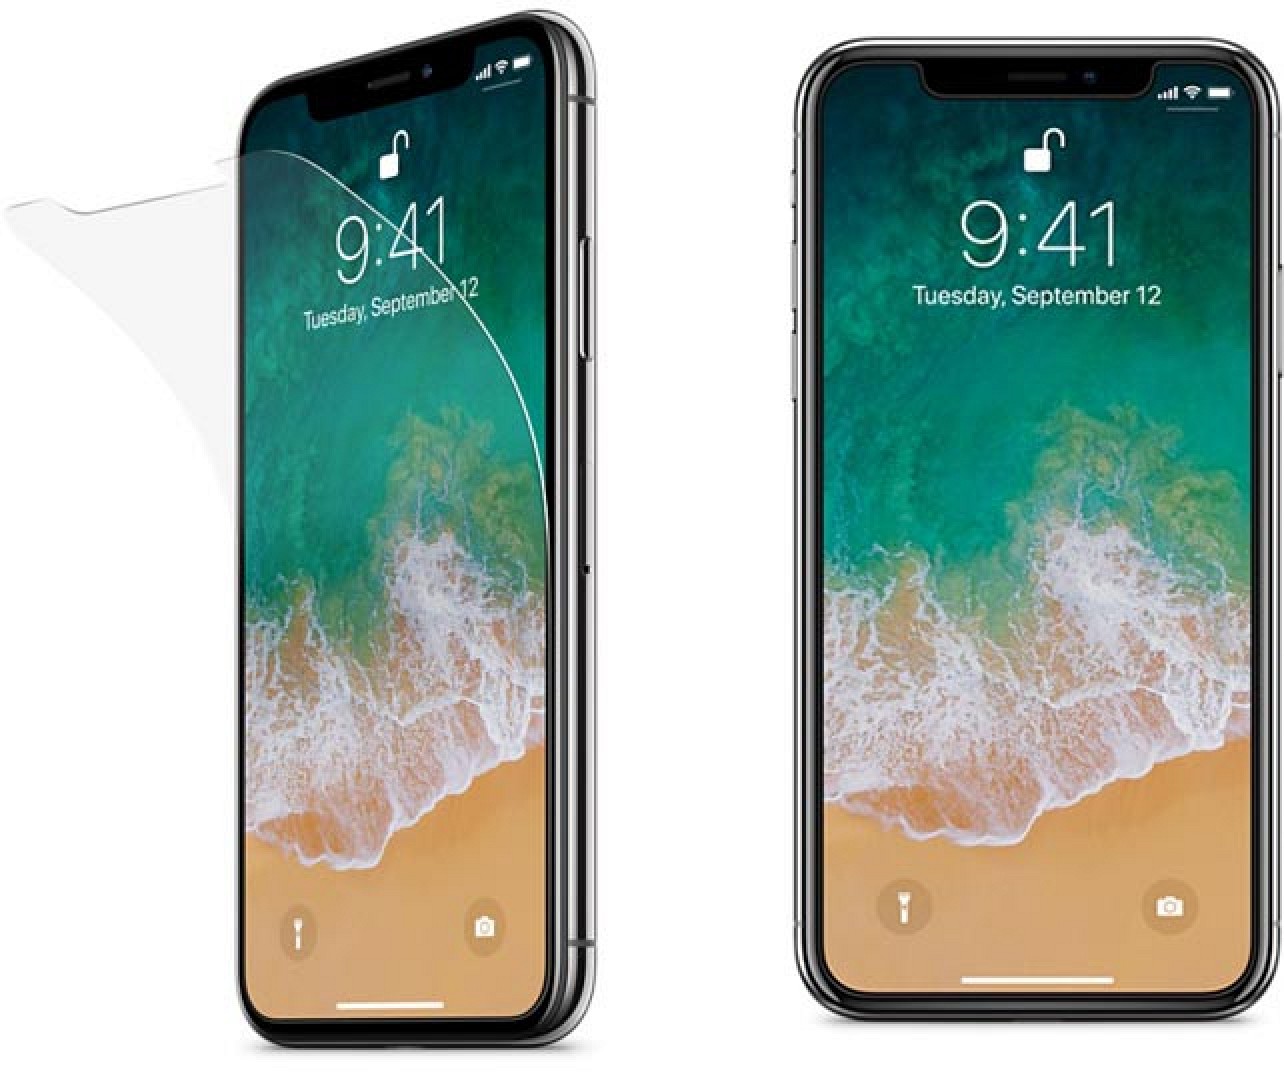 Protective glass InvisiGlass Ultra for iPhone X has become more durable